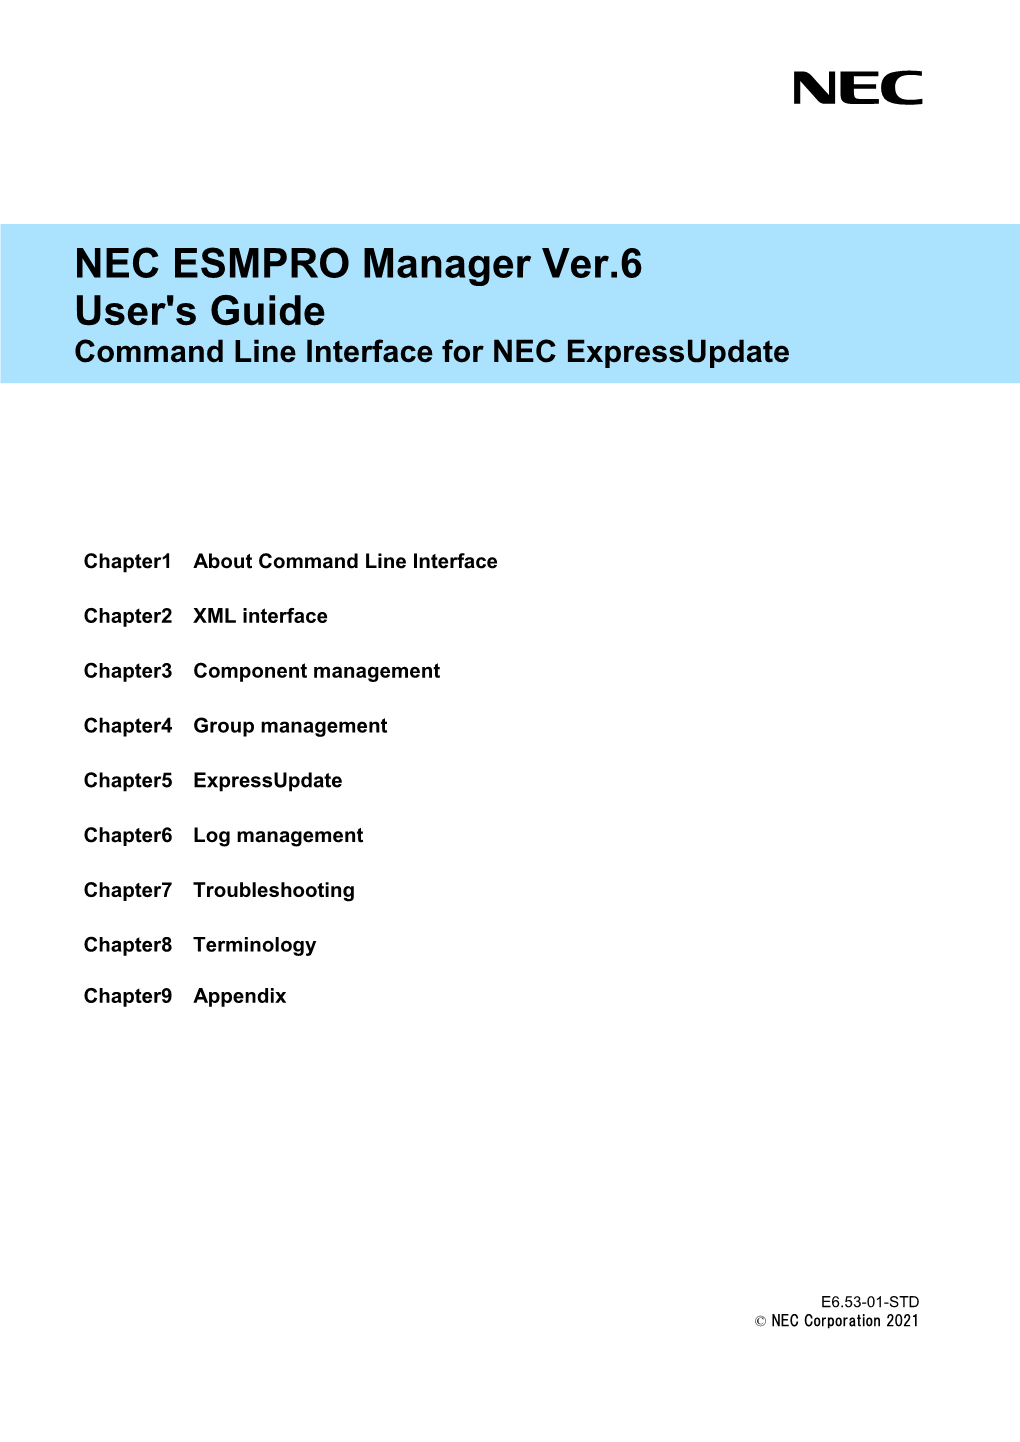 Command Line Interface User's Guide for NEC Expressupdate [PDF]